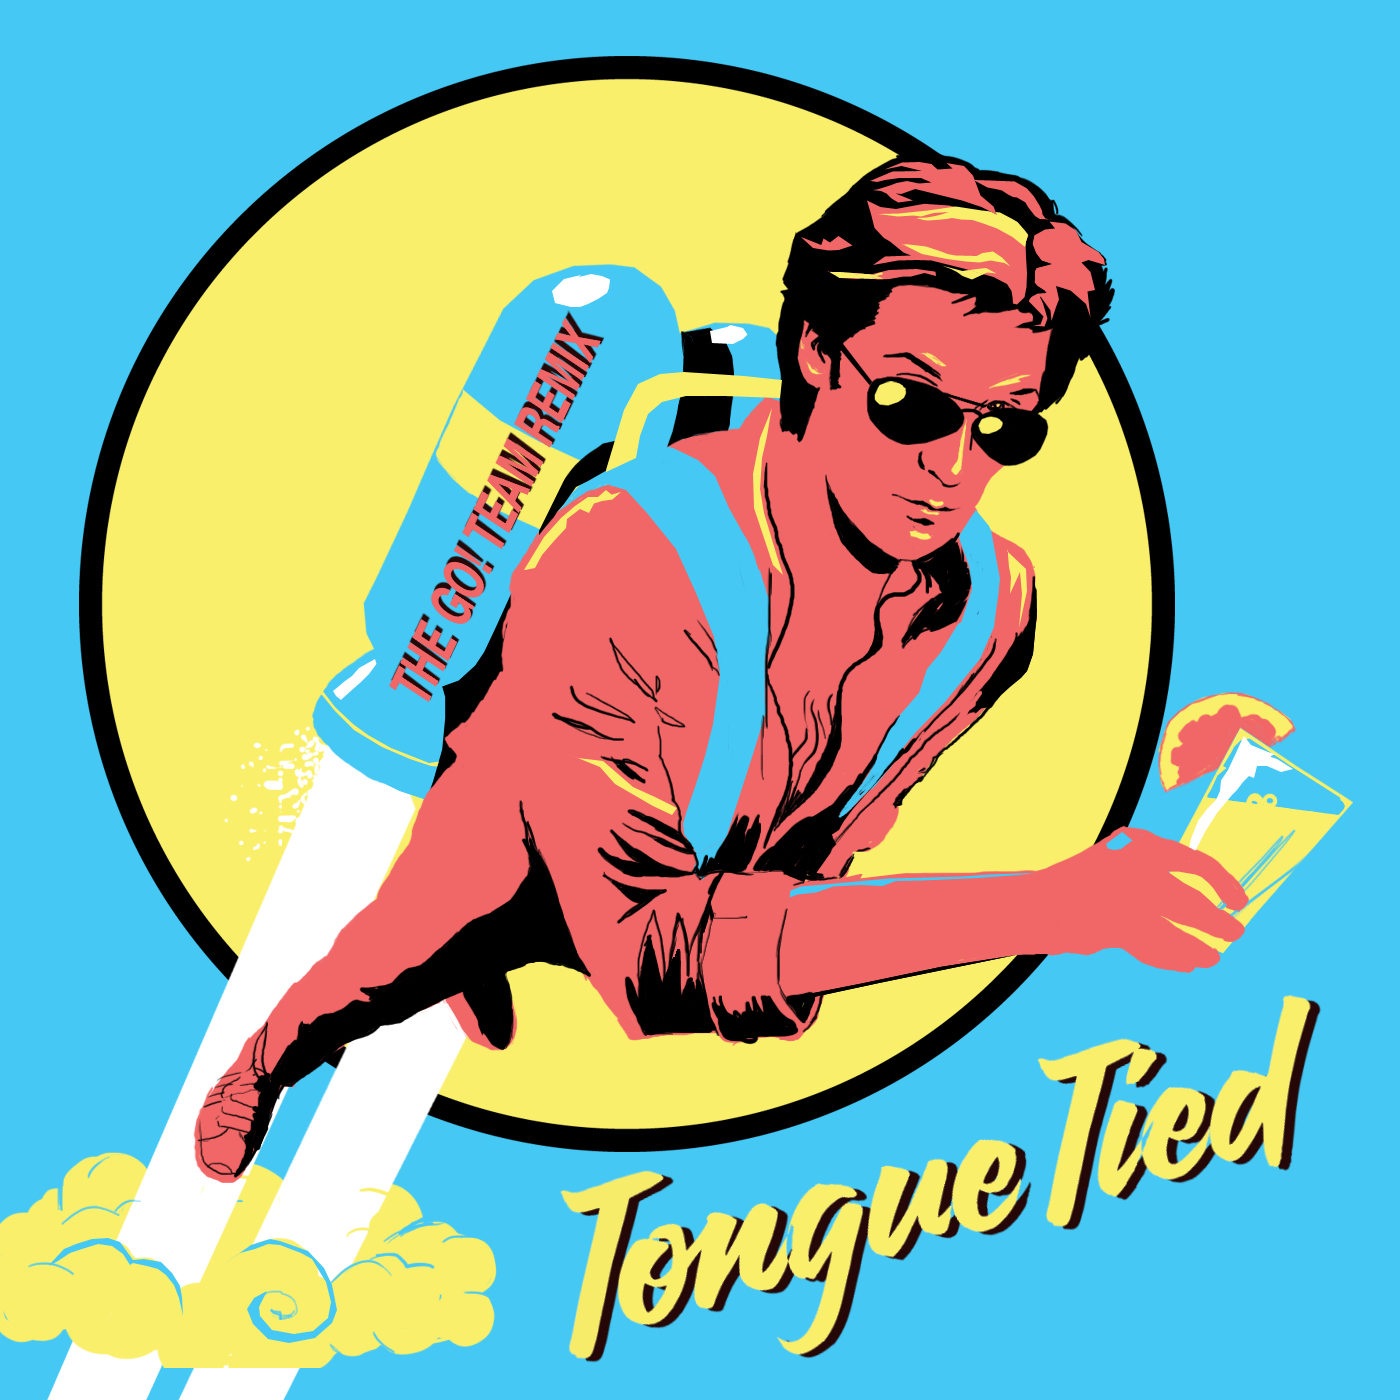 Hot Collars – “Tongue Tied” (The Go! Team Remix)